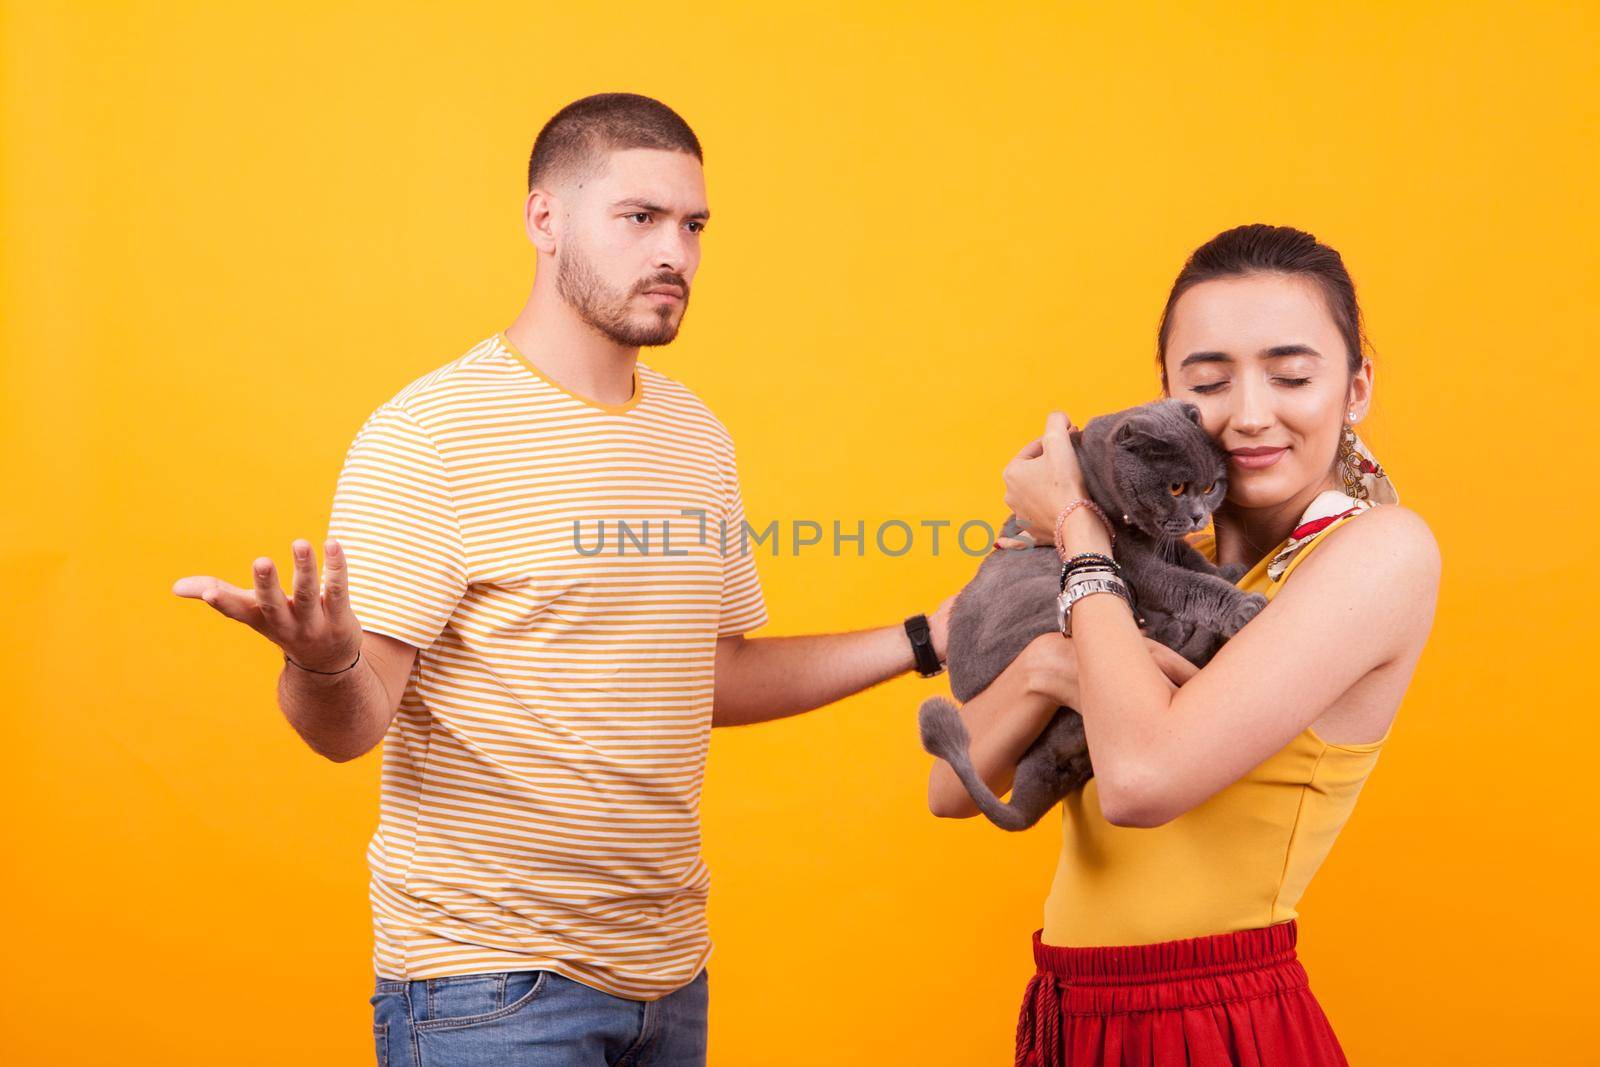 Gelous boyfriend on their cat for stealing affection from his girlfriend by DCStudio